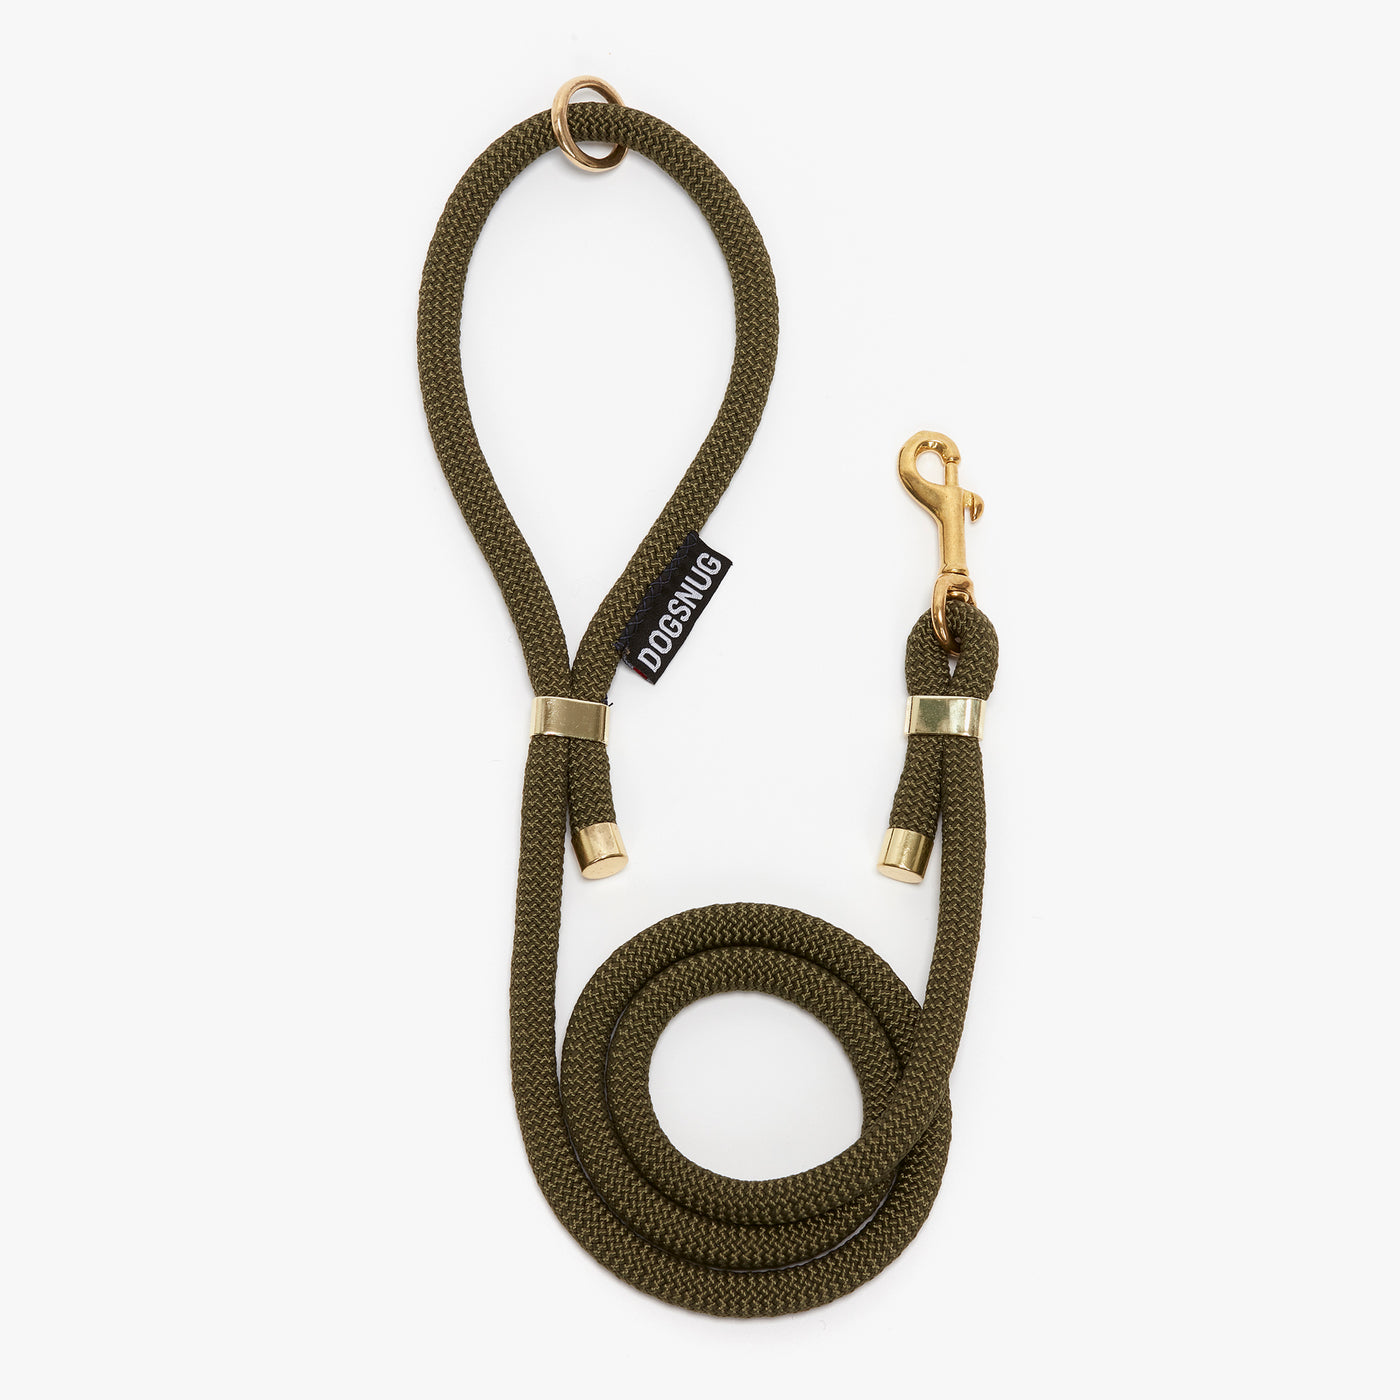 Rope dog lead in olive green, standard length